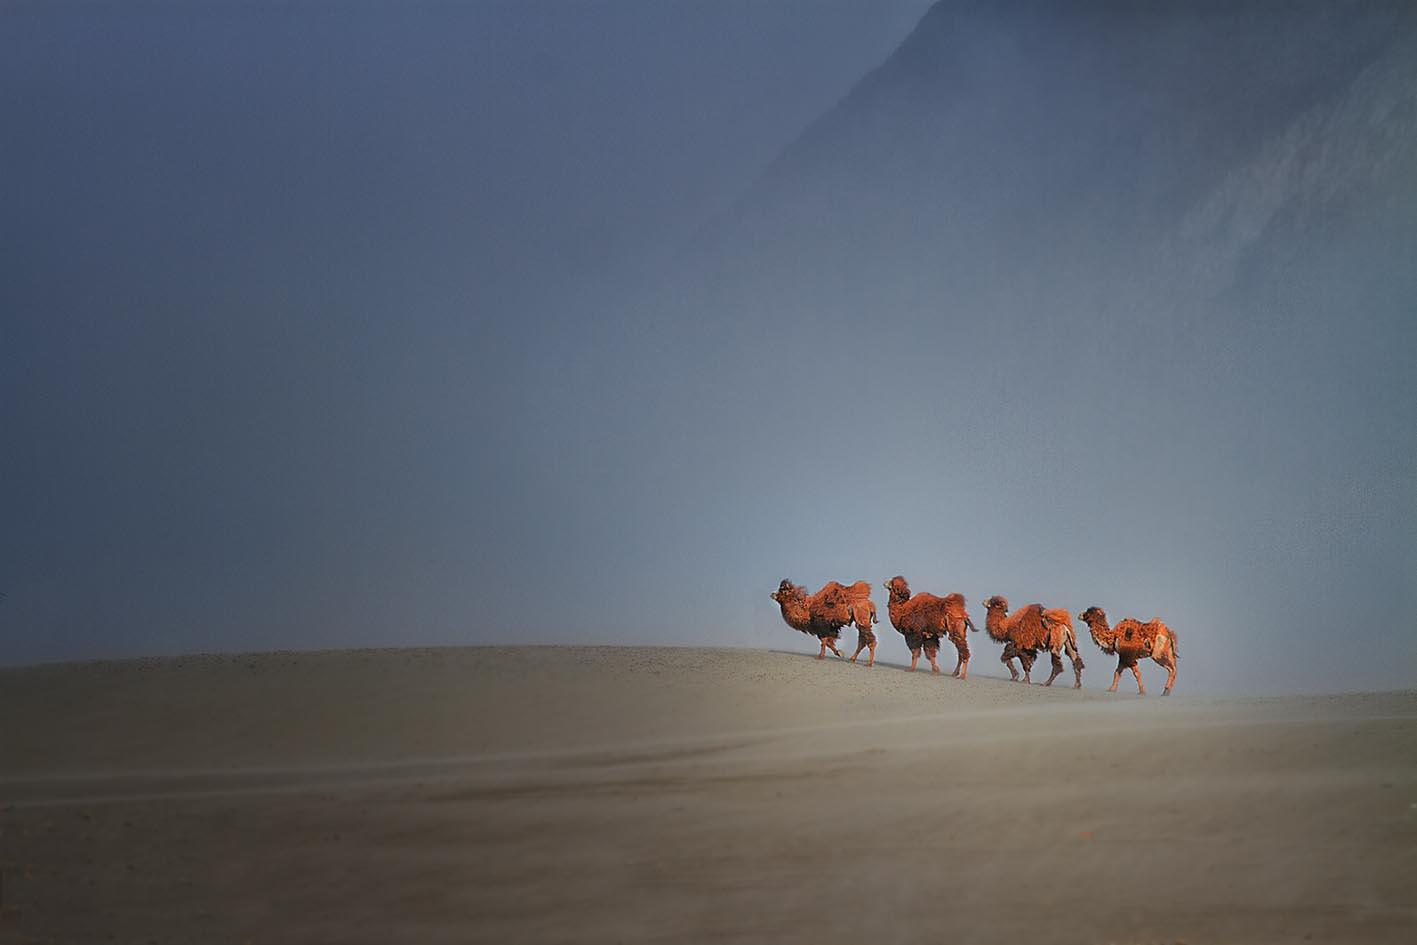 Bactrian Camels of Nubra Valley